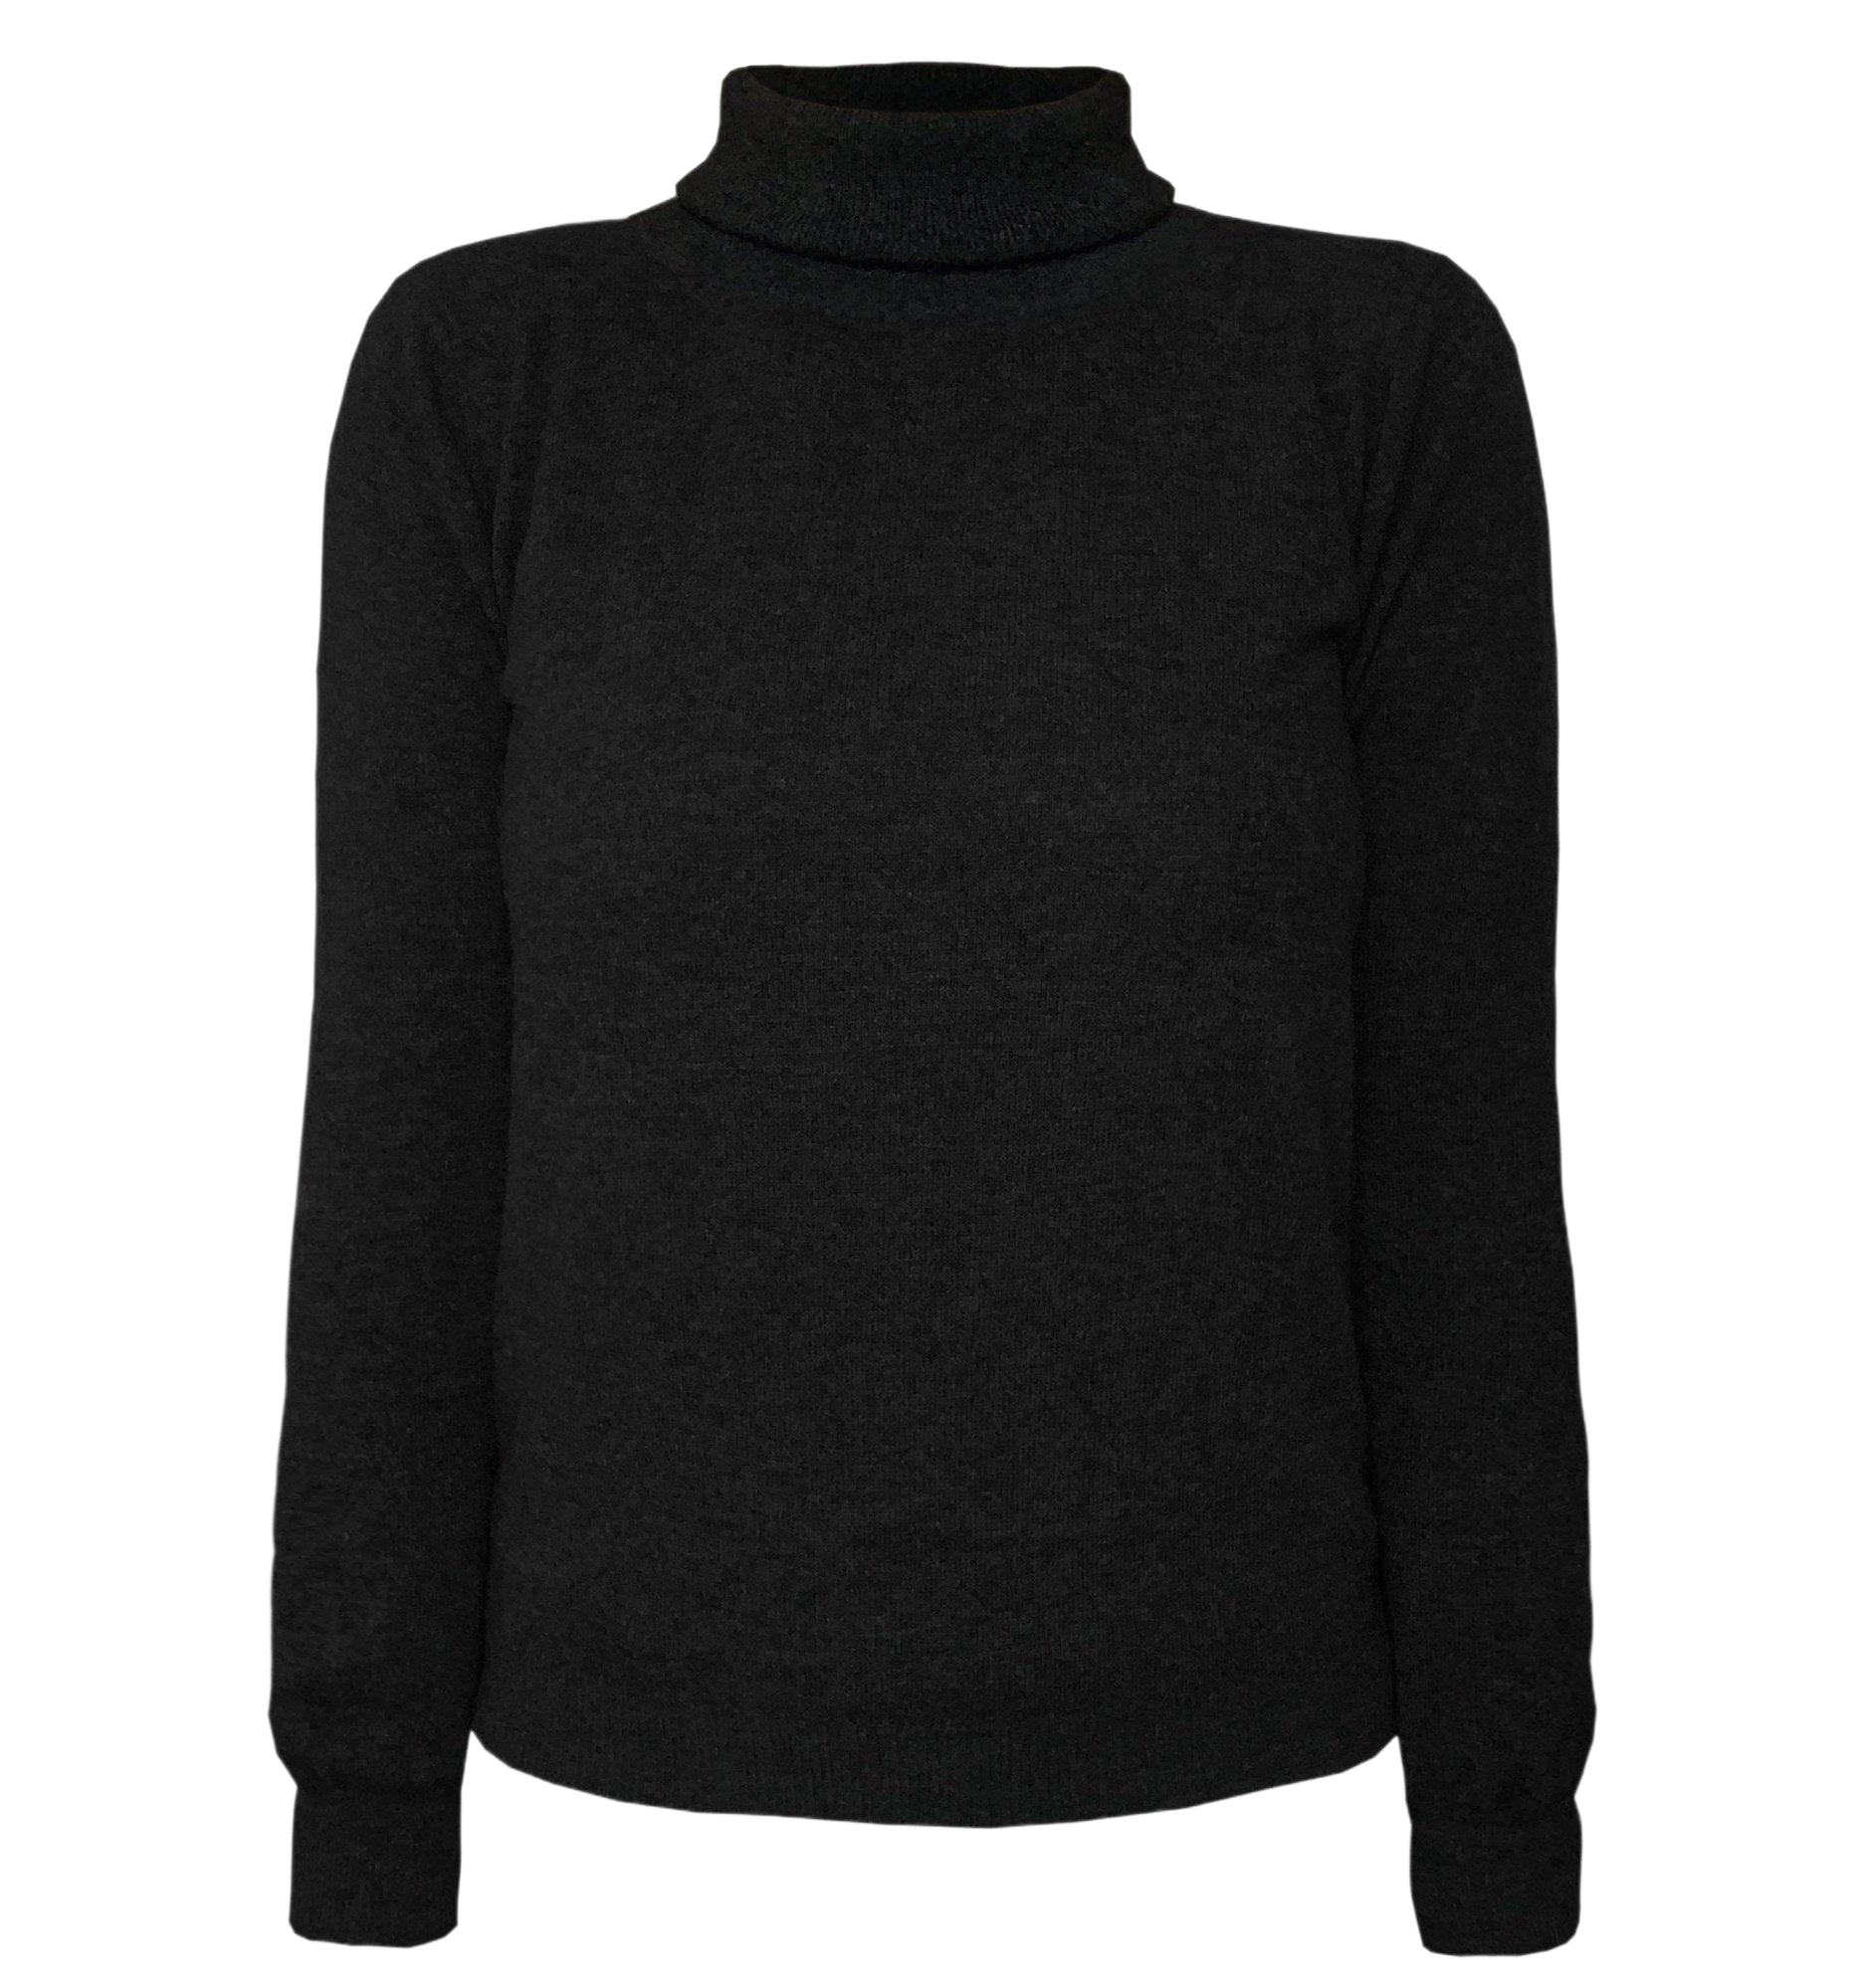 Camma Turtleneck Wool - Recycled knit - A New Story